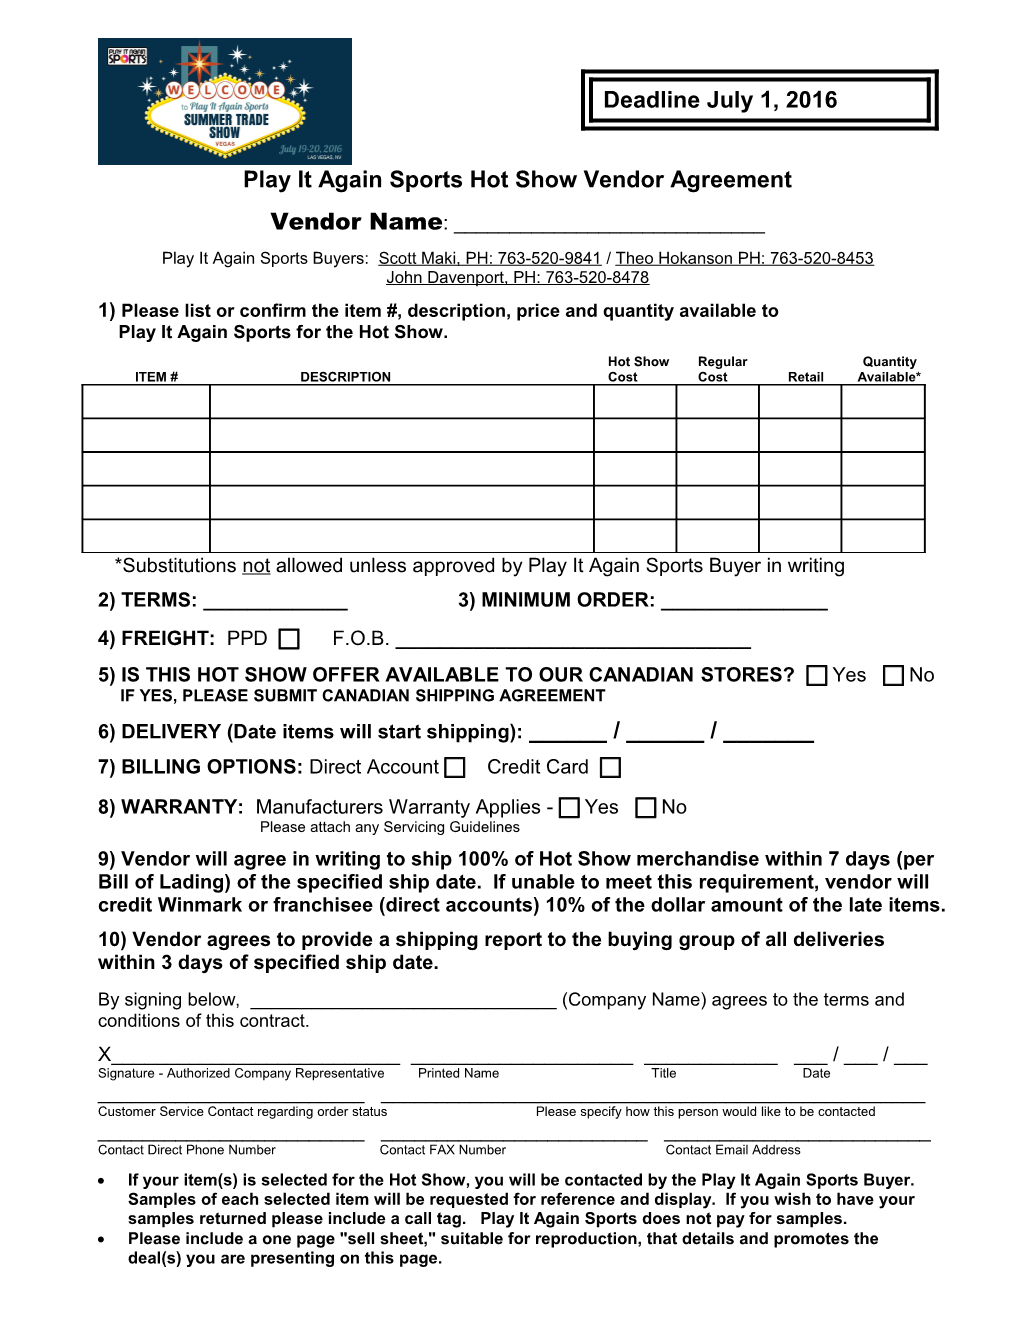 Play It Again Sports Hot Show Vendor Agreement